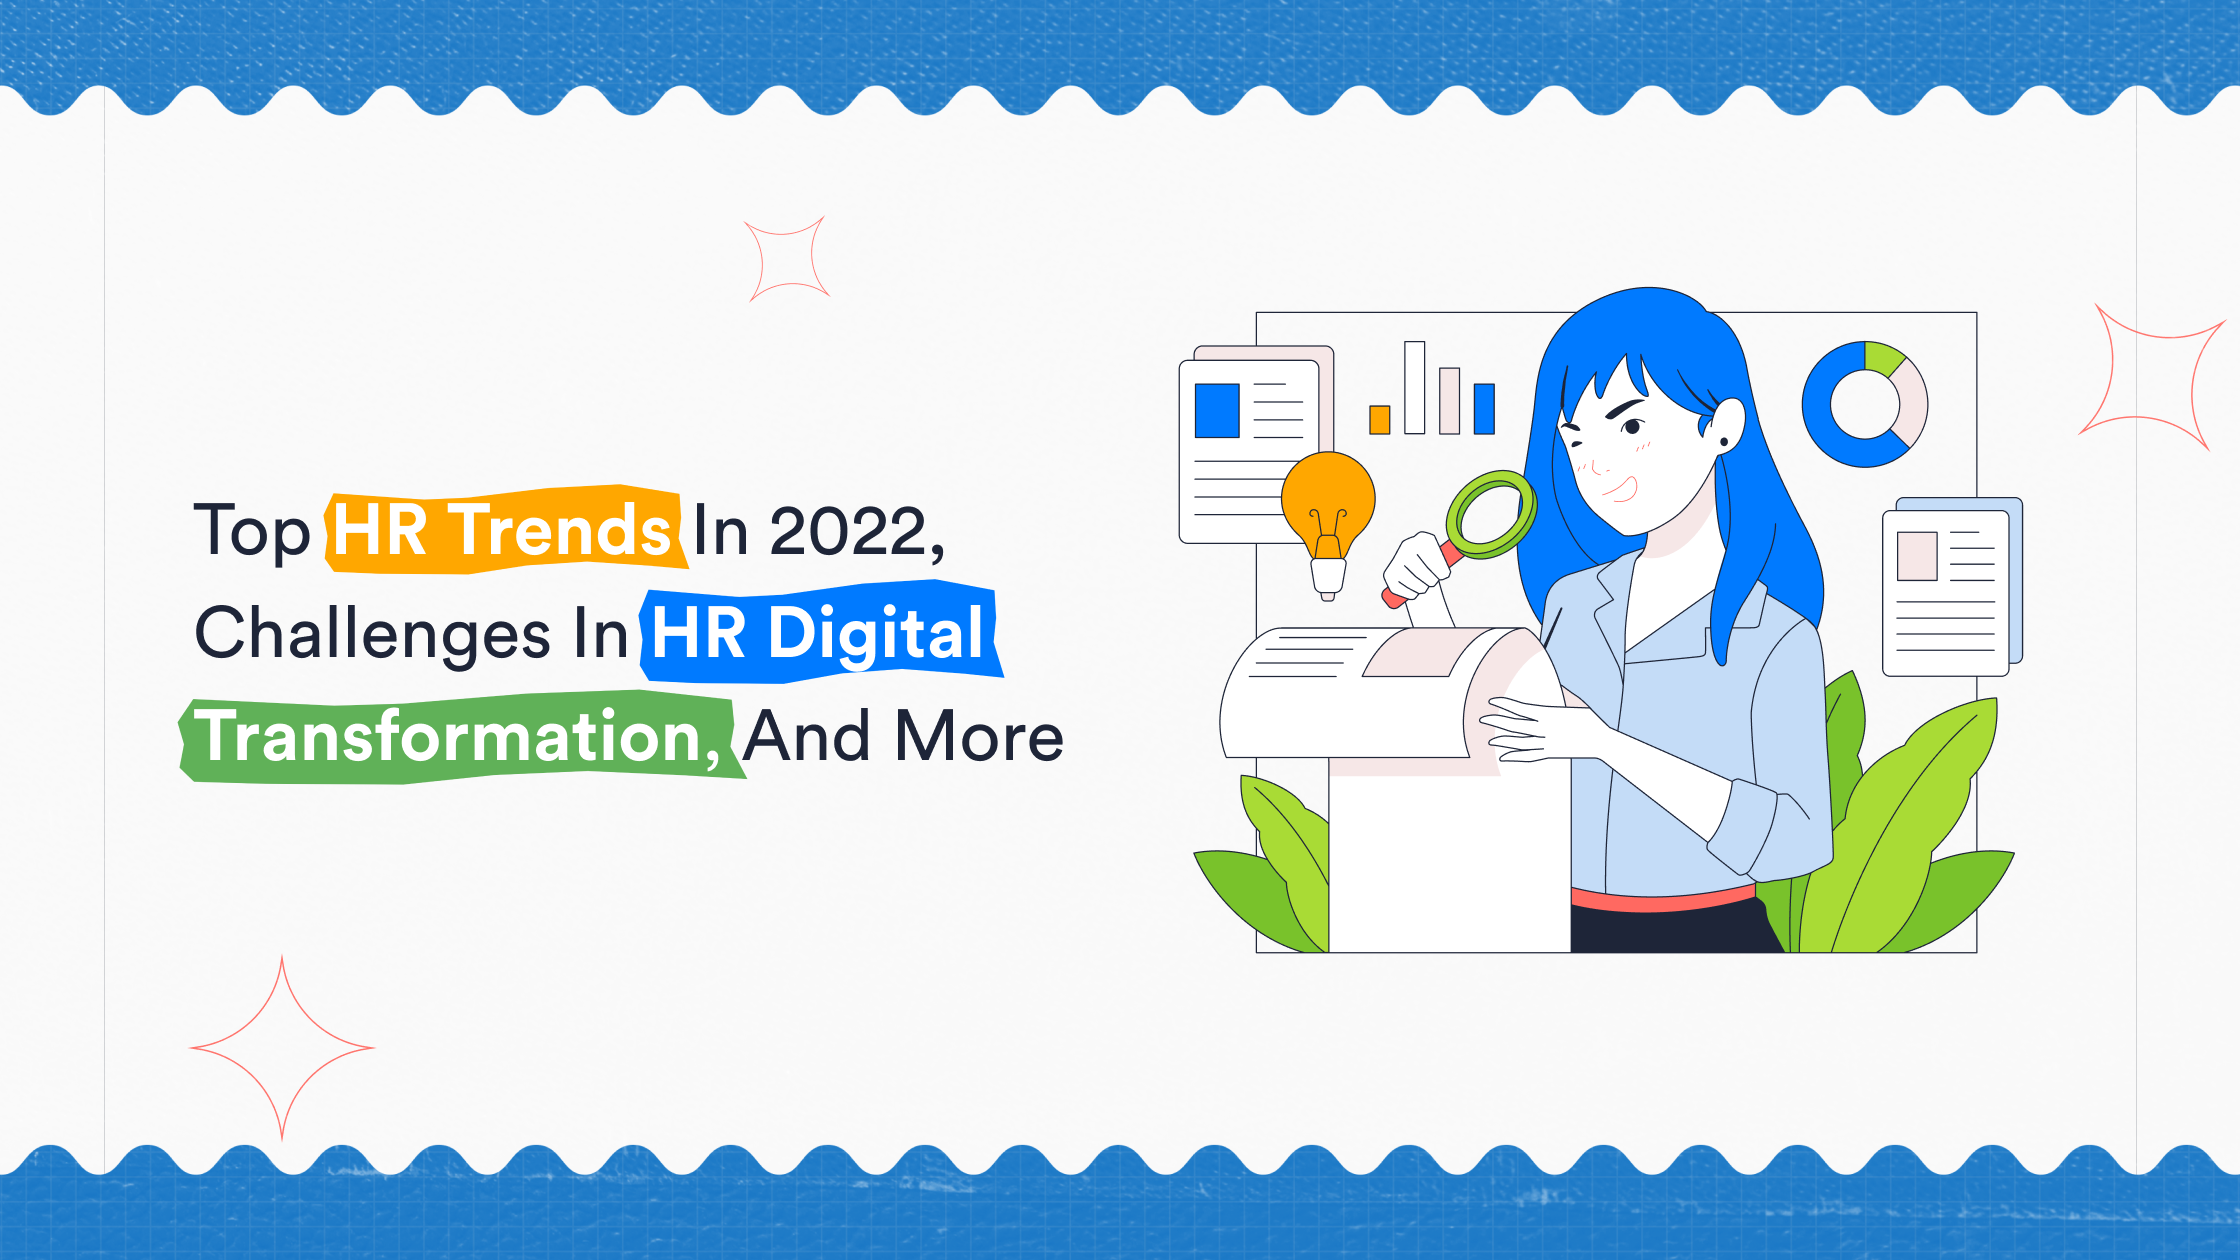 Top HR Trends in 2022 Challenges in HR Digital Transformation and More